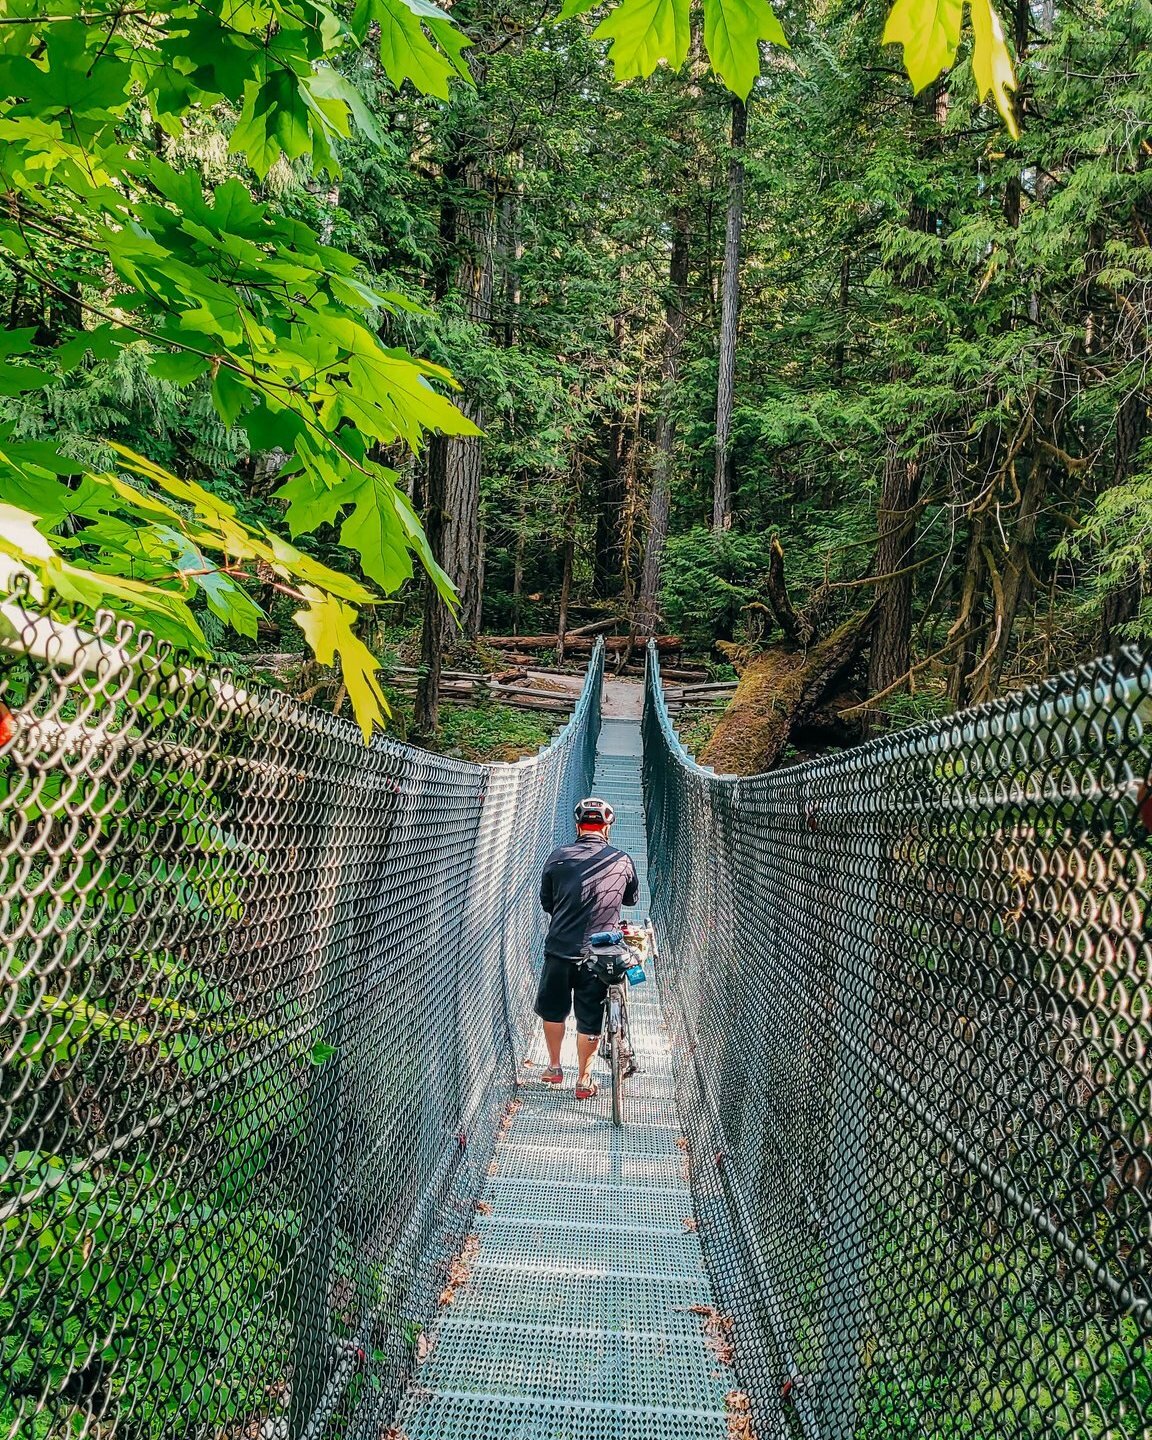 There are plenty of bridges to cross on the Cowichan Valley Campout. We have had some awesome rides along the trails and tracks on this tour, with lots of climbing and sunshine!
.
#bikepacking #britishcolumbia #travel #nature #adventure #gravelbike #